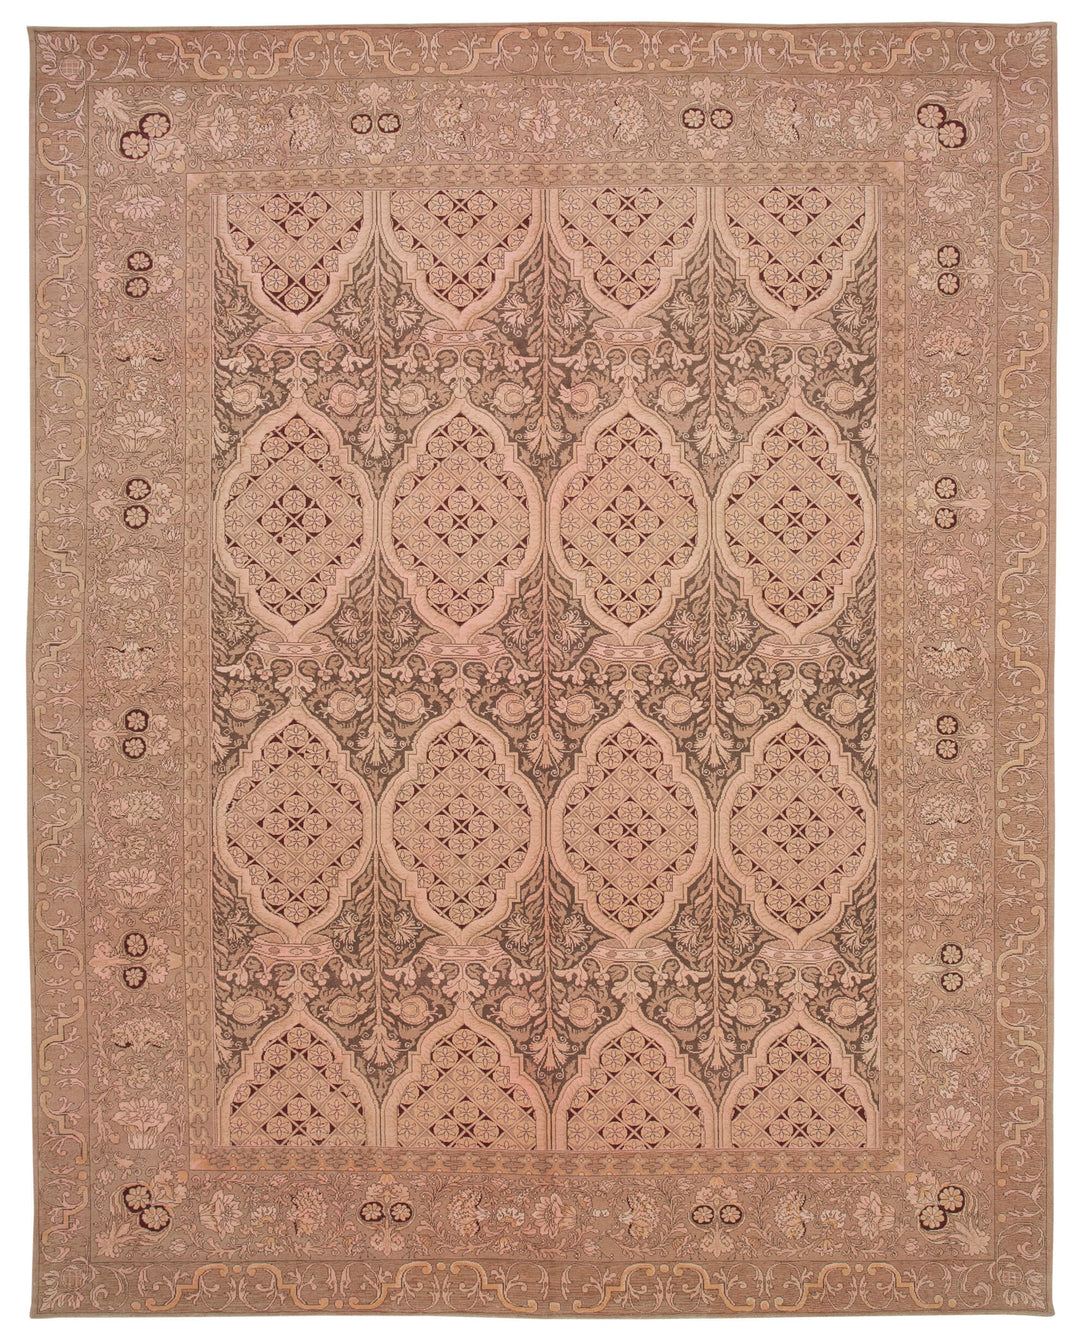 Handmade Oushak Area Rug > Design# OL-AC-35805 > Size: 10'-2" x 12'-11", Carpet Culture Rugs, Handmade Rugs, NYC Rugs, New Rugs, Shop Rugs, Rug Store, Outlet Rugs, SoHo Rugs, Rugs in USA